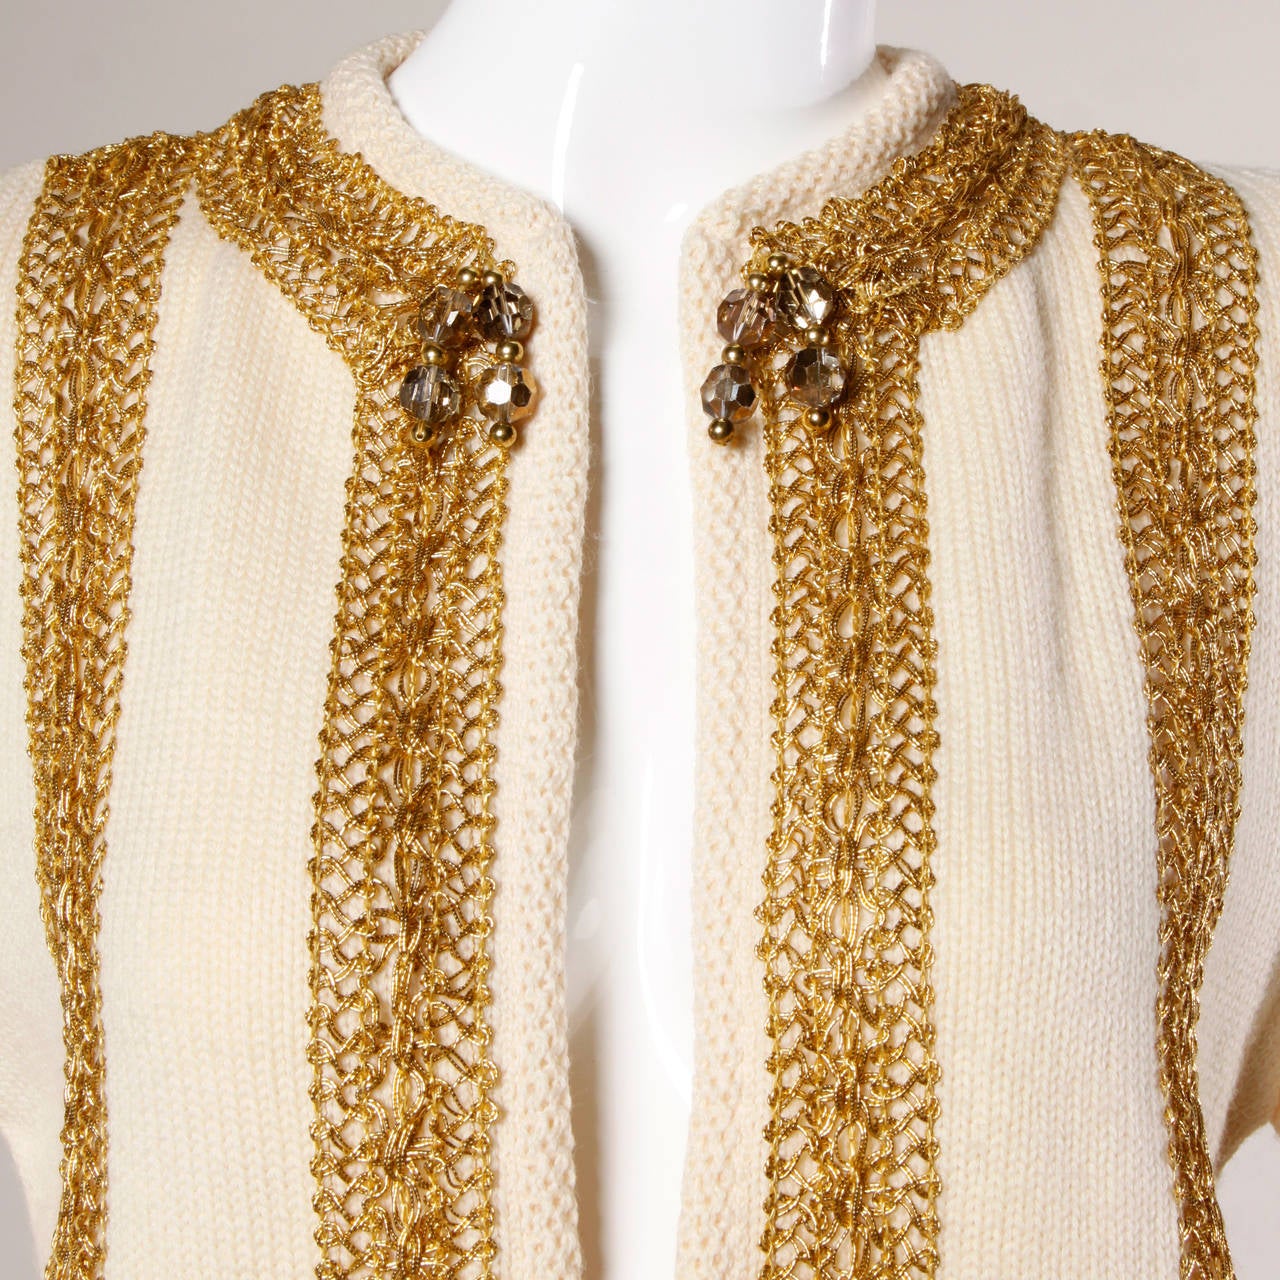 Chunky knit natural wool cardigan sweater with metallic gold trim and bead detail. By Ethel Beverly Hills.

Details:

Unlined
No Closure
Marked Size: Not Marked
Estimated Size: Small
Color: Cream/ Metallic Gold
Fabric: 100% Wool
Label: